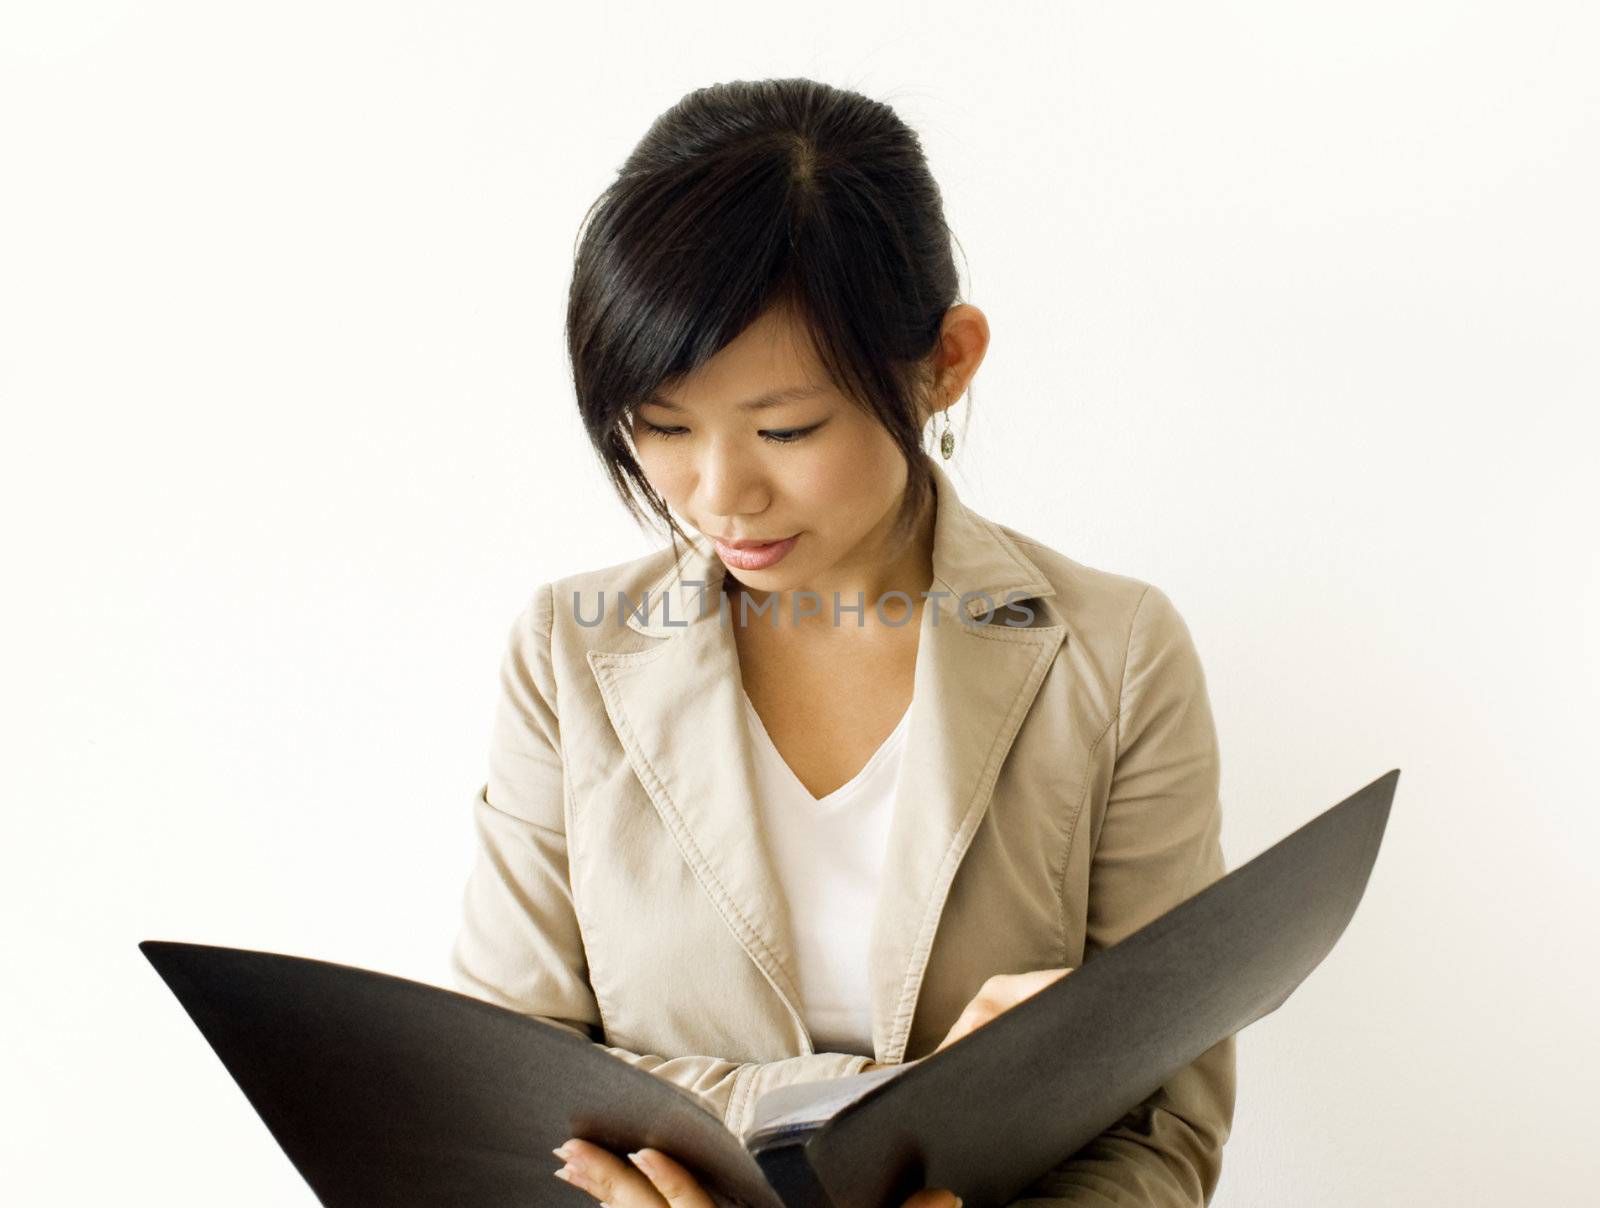 Asian girl reading document. For education/business purpose.